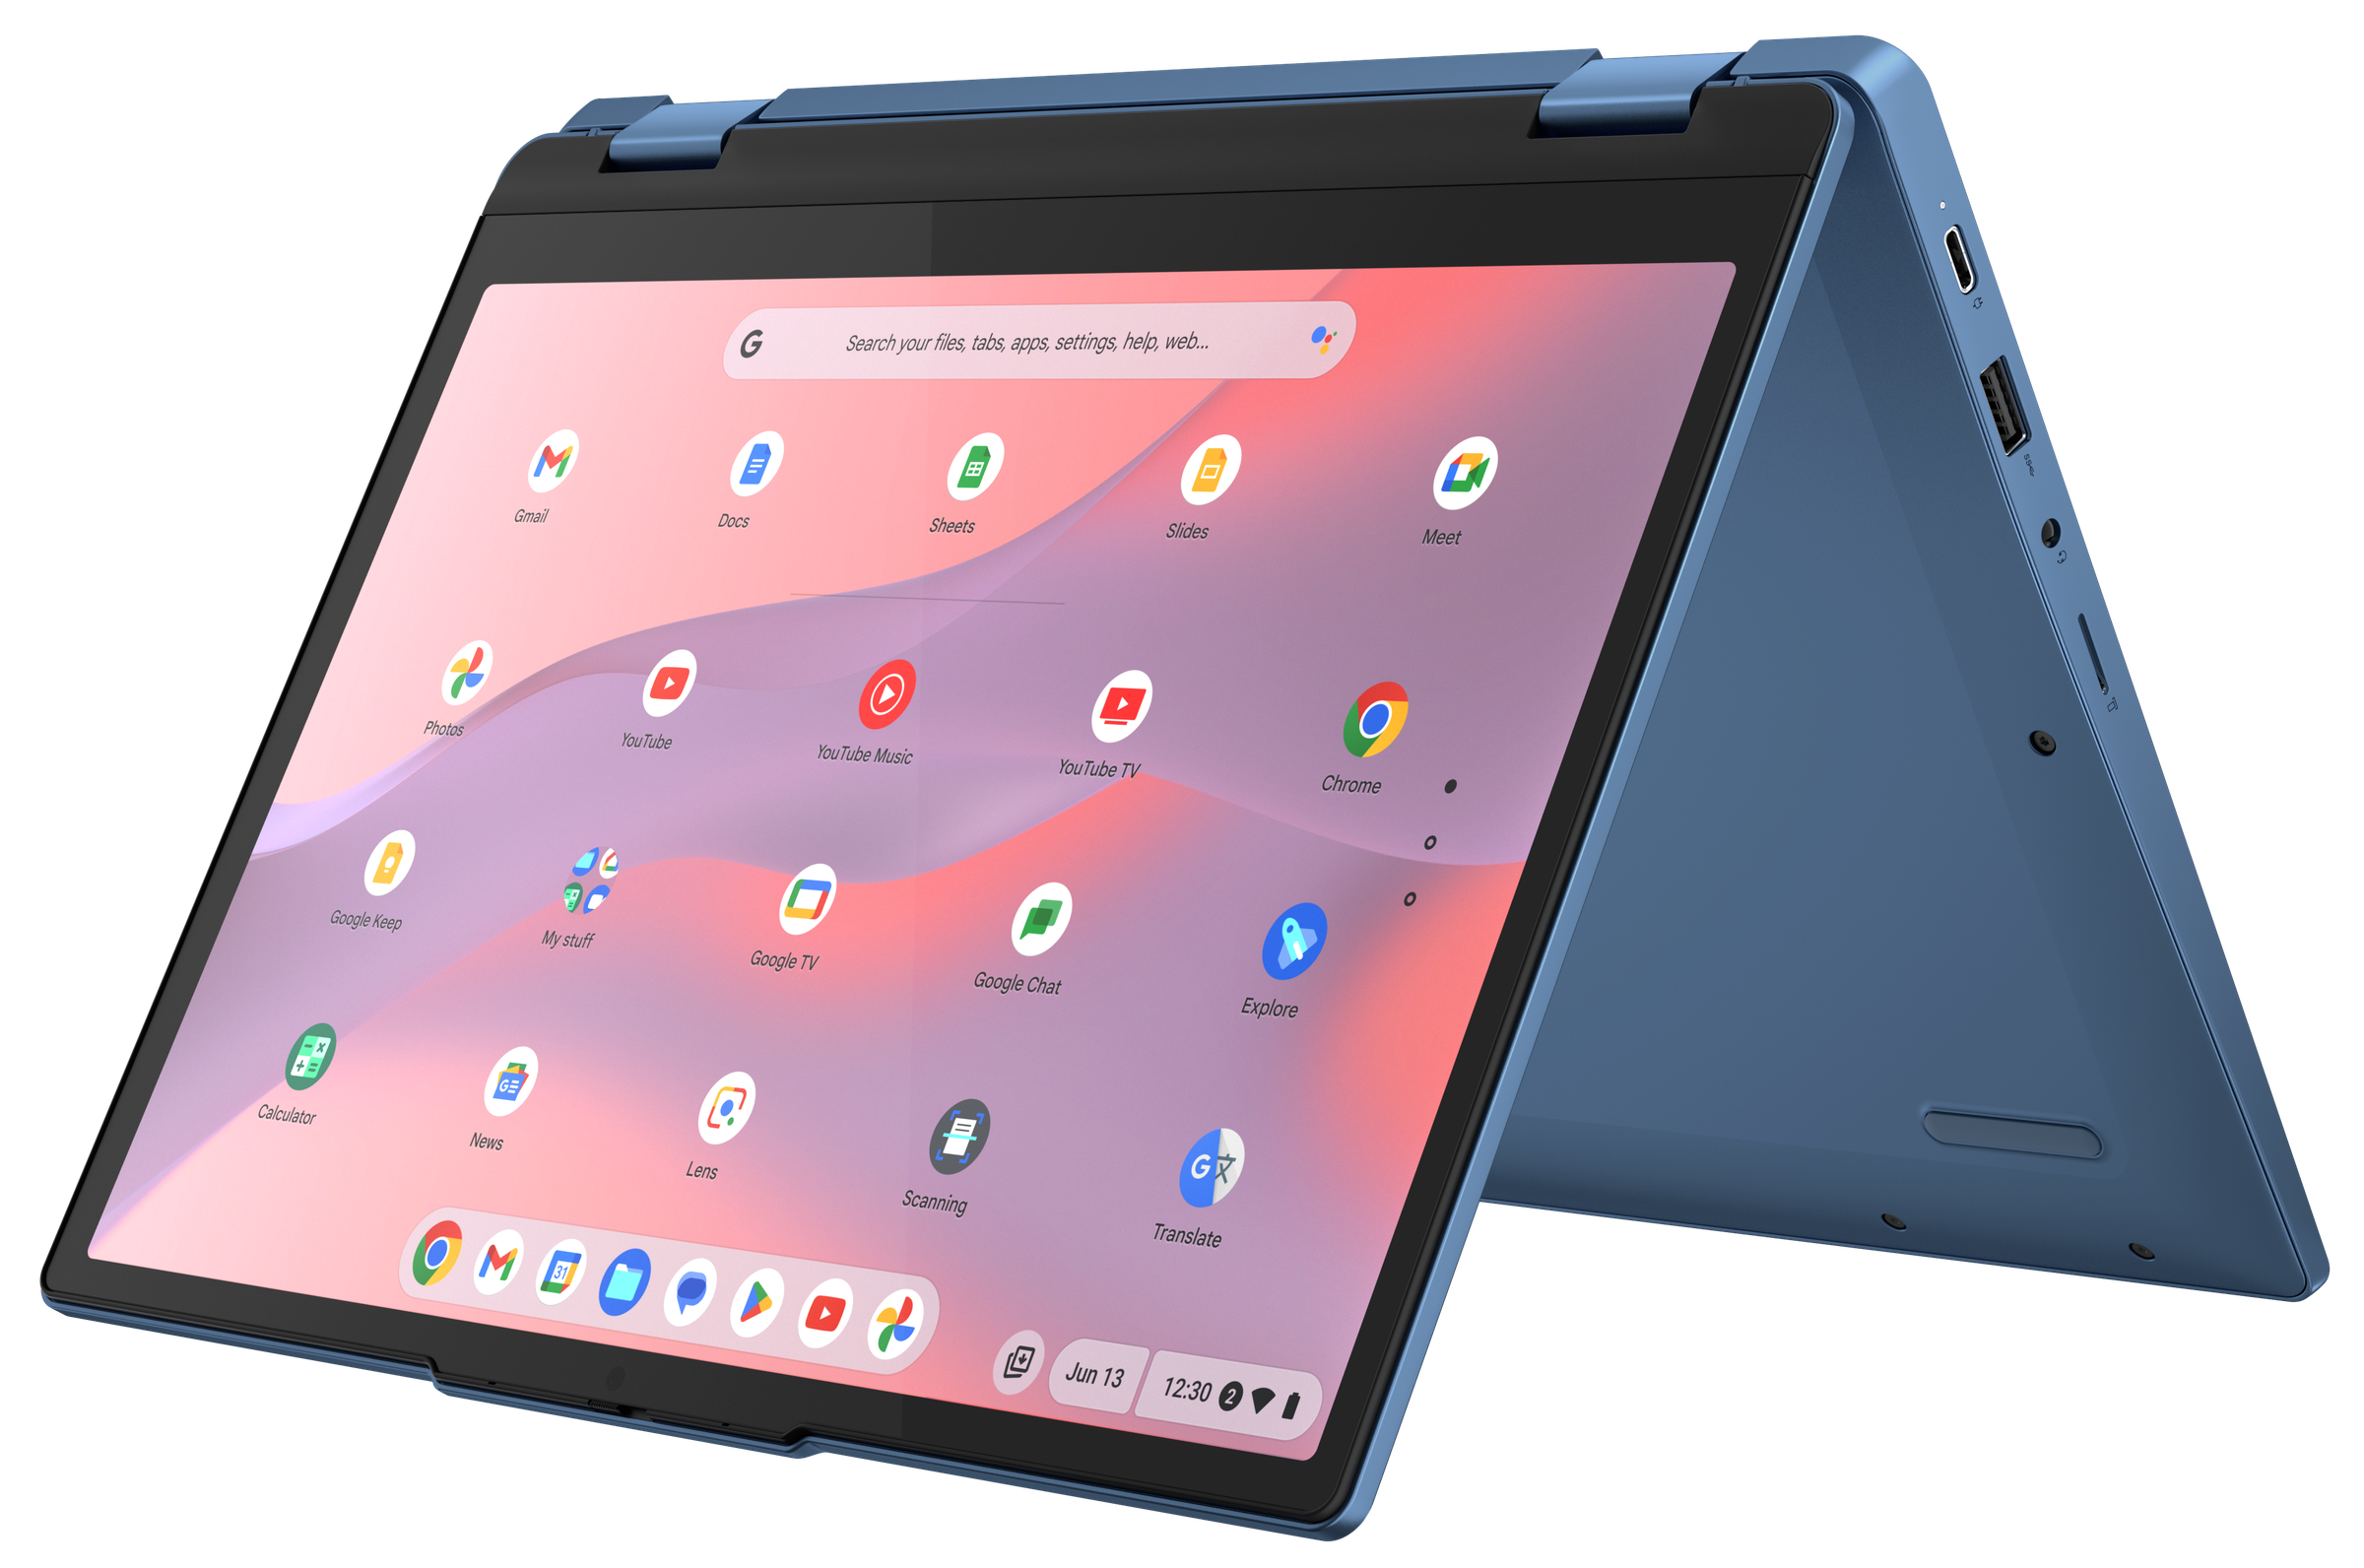 The Abyss Blue Lenovo Ideapad Flex 3i in tent mode, displaying the Chrome OS Launcher.